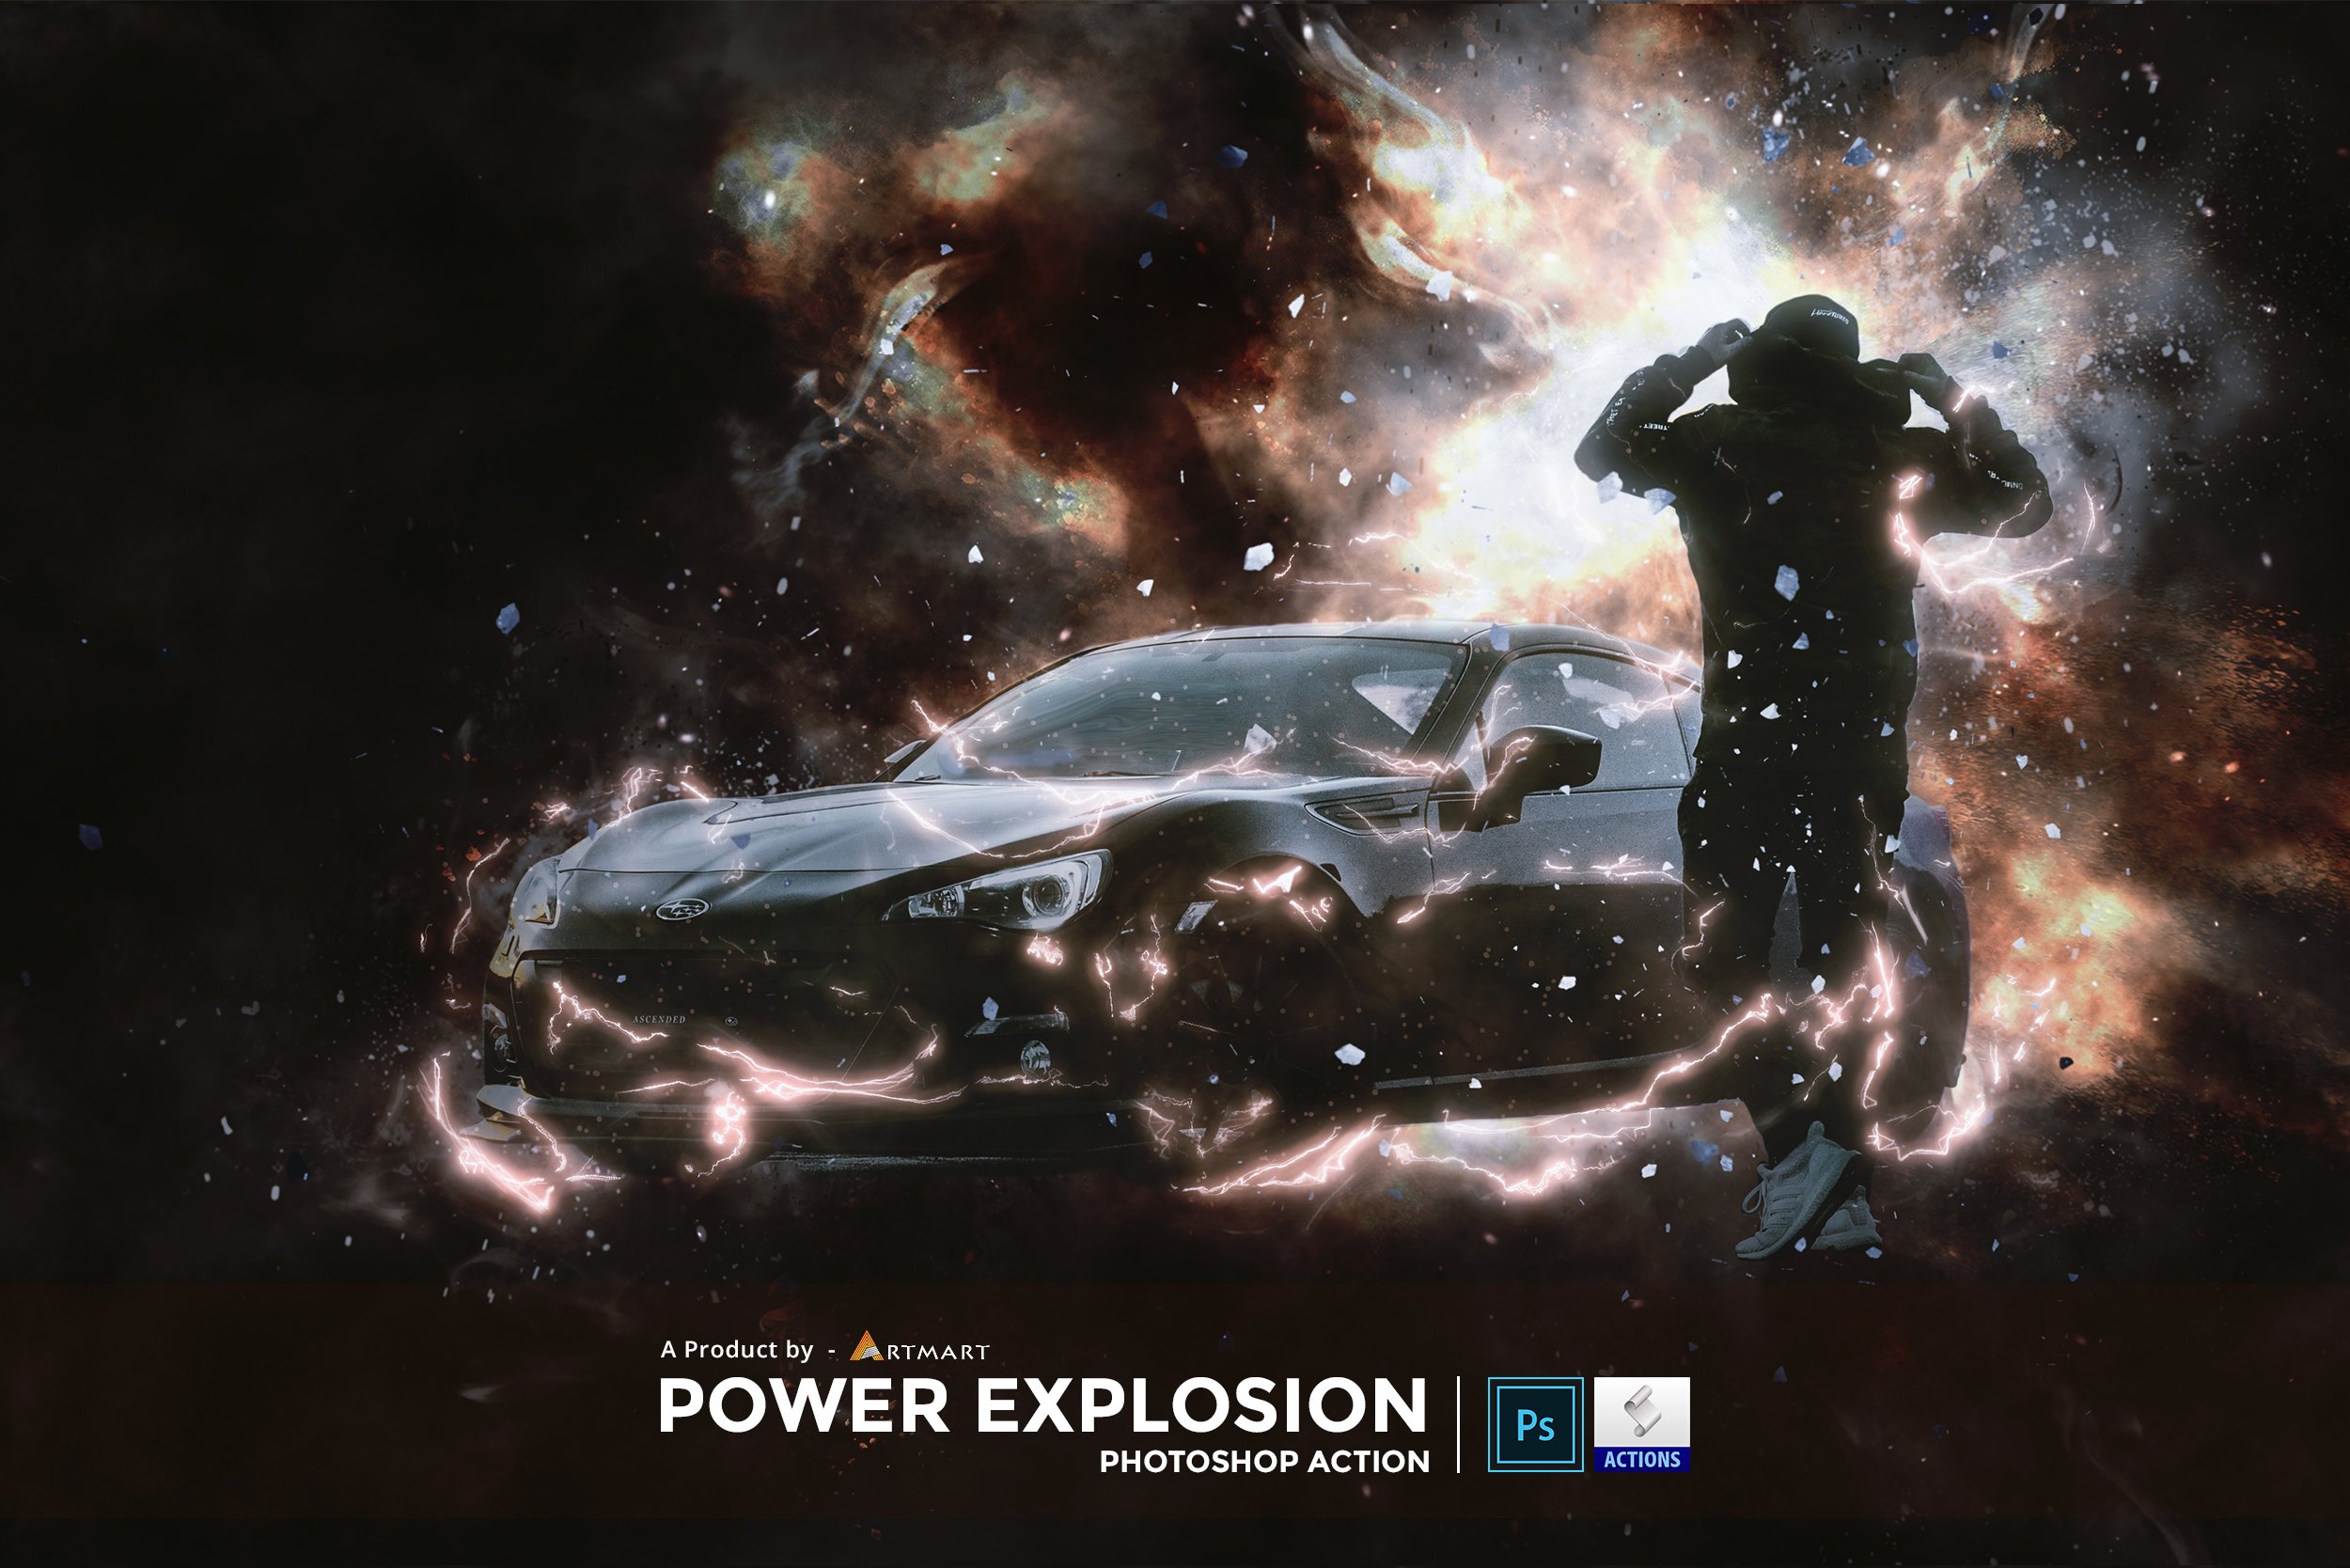 power explosions 28129 979